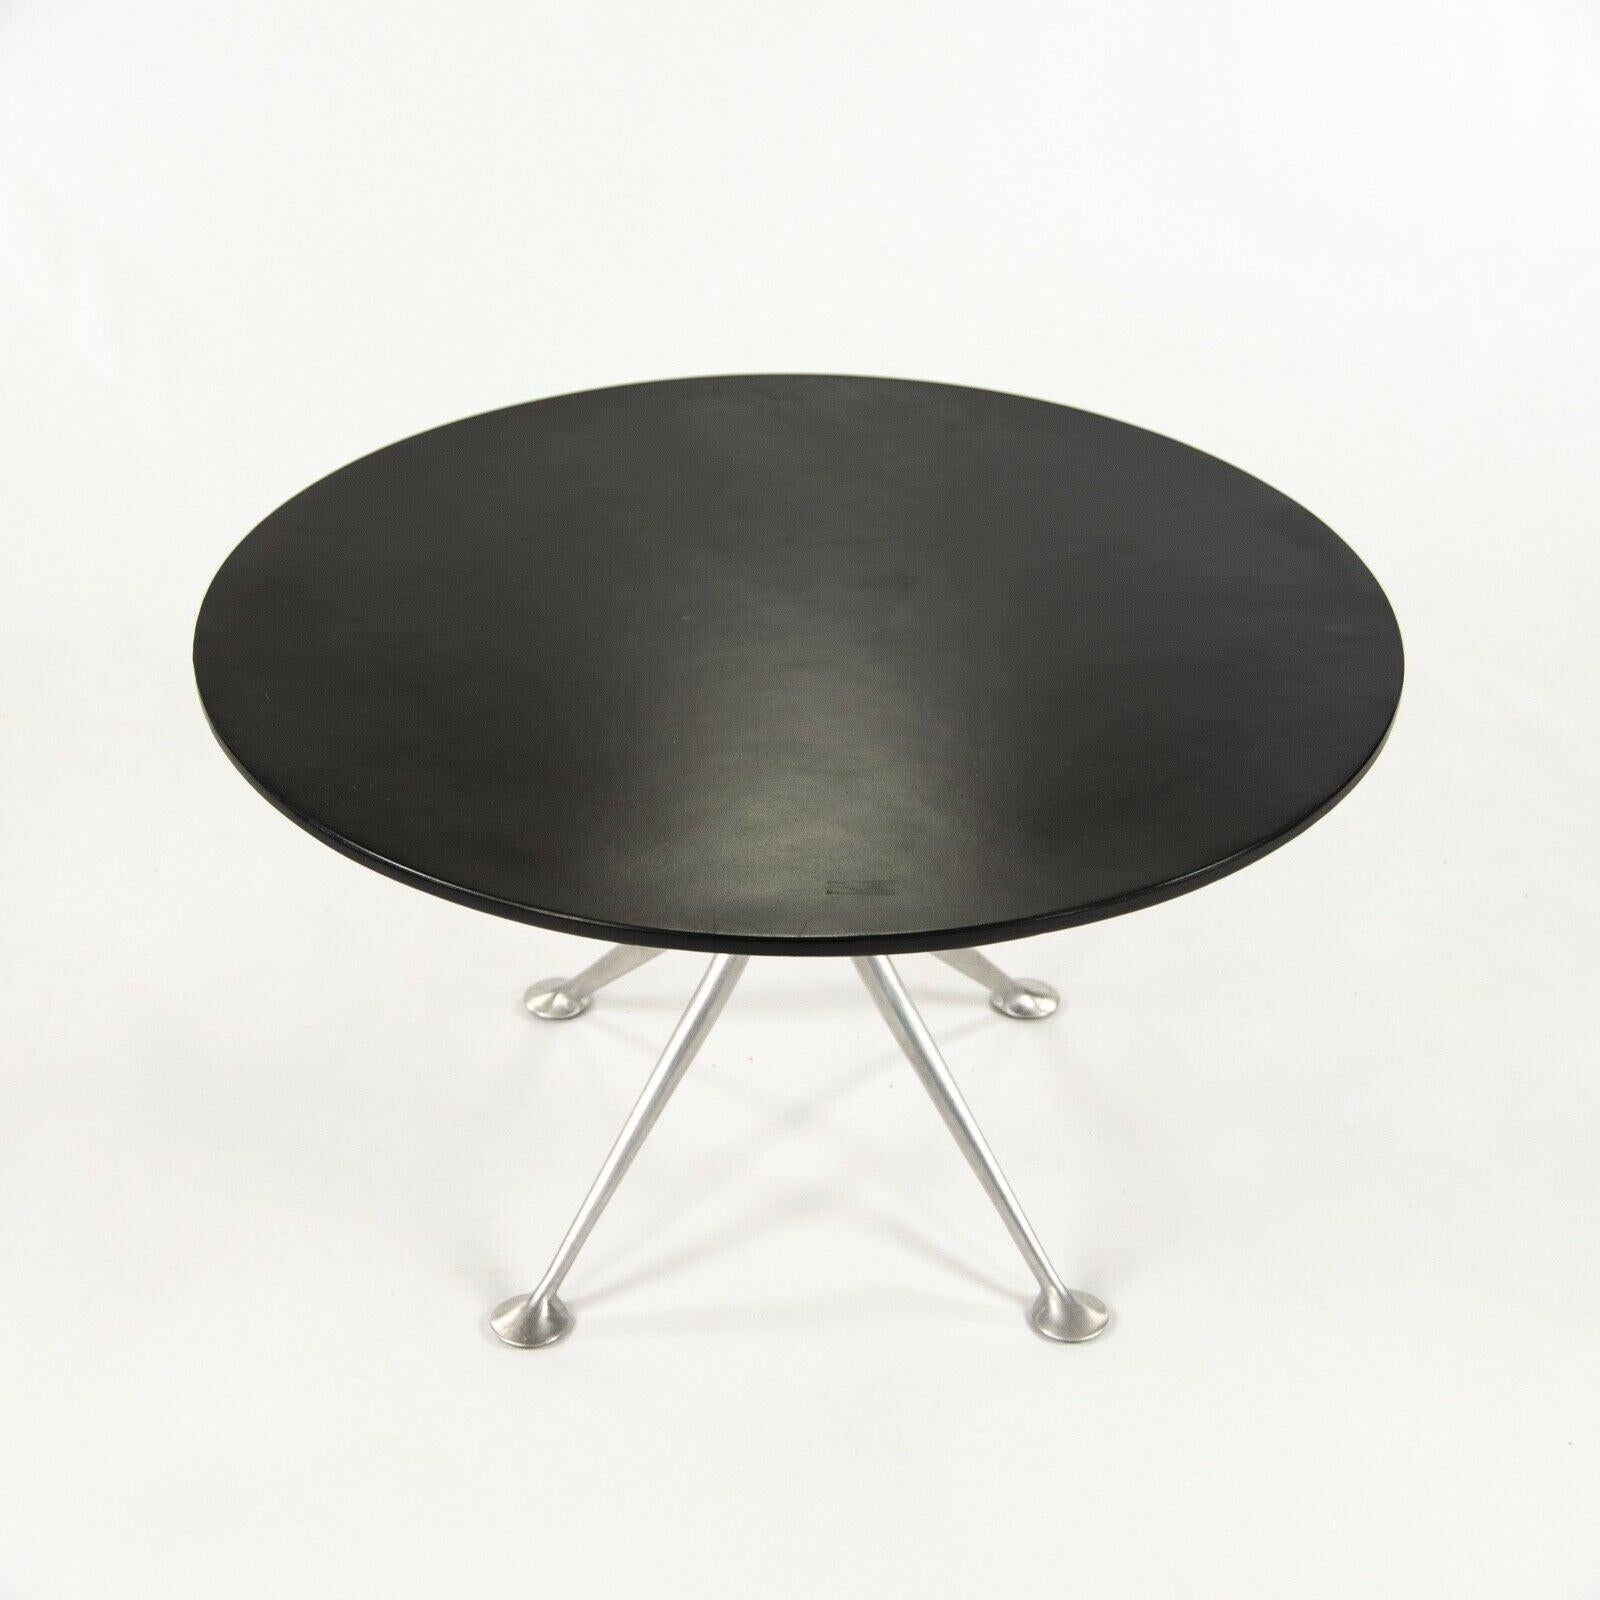 Modern 1967 Rare Alexander Girard & Charles Eames Coffee Table with Black Laminate Top For Sale